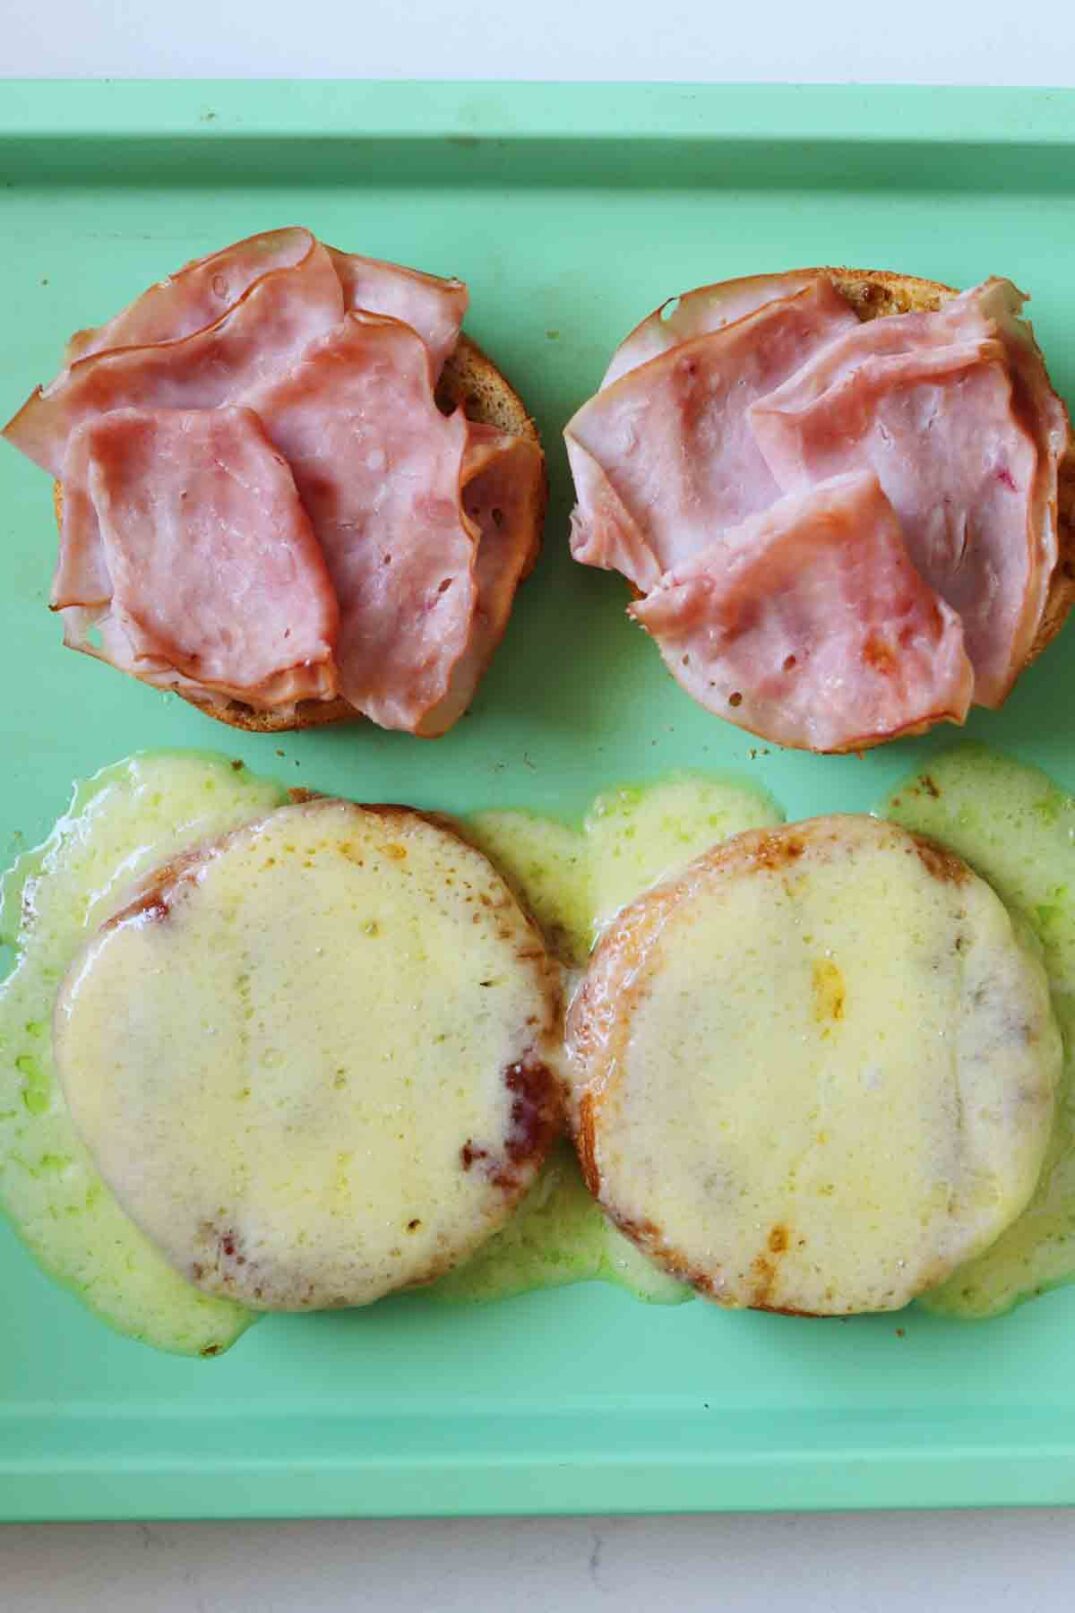 melted comte and caramelized ham on croissant buns.